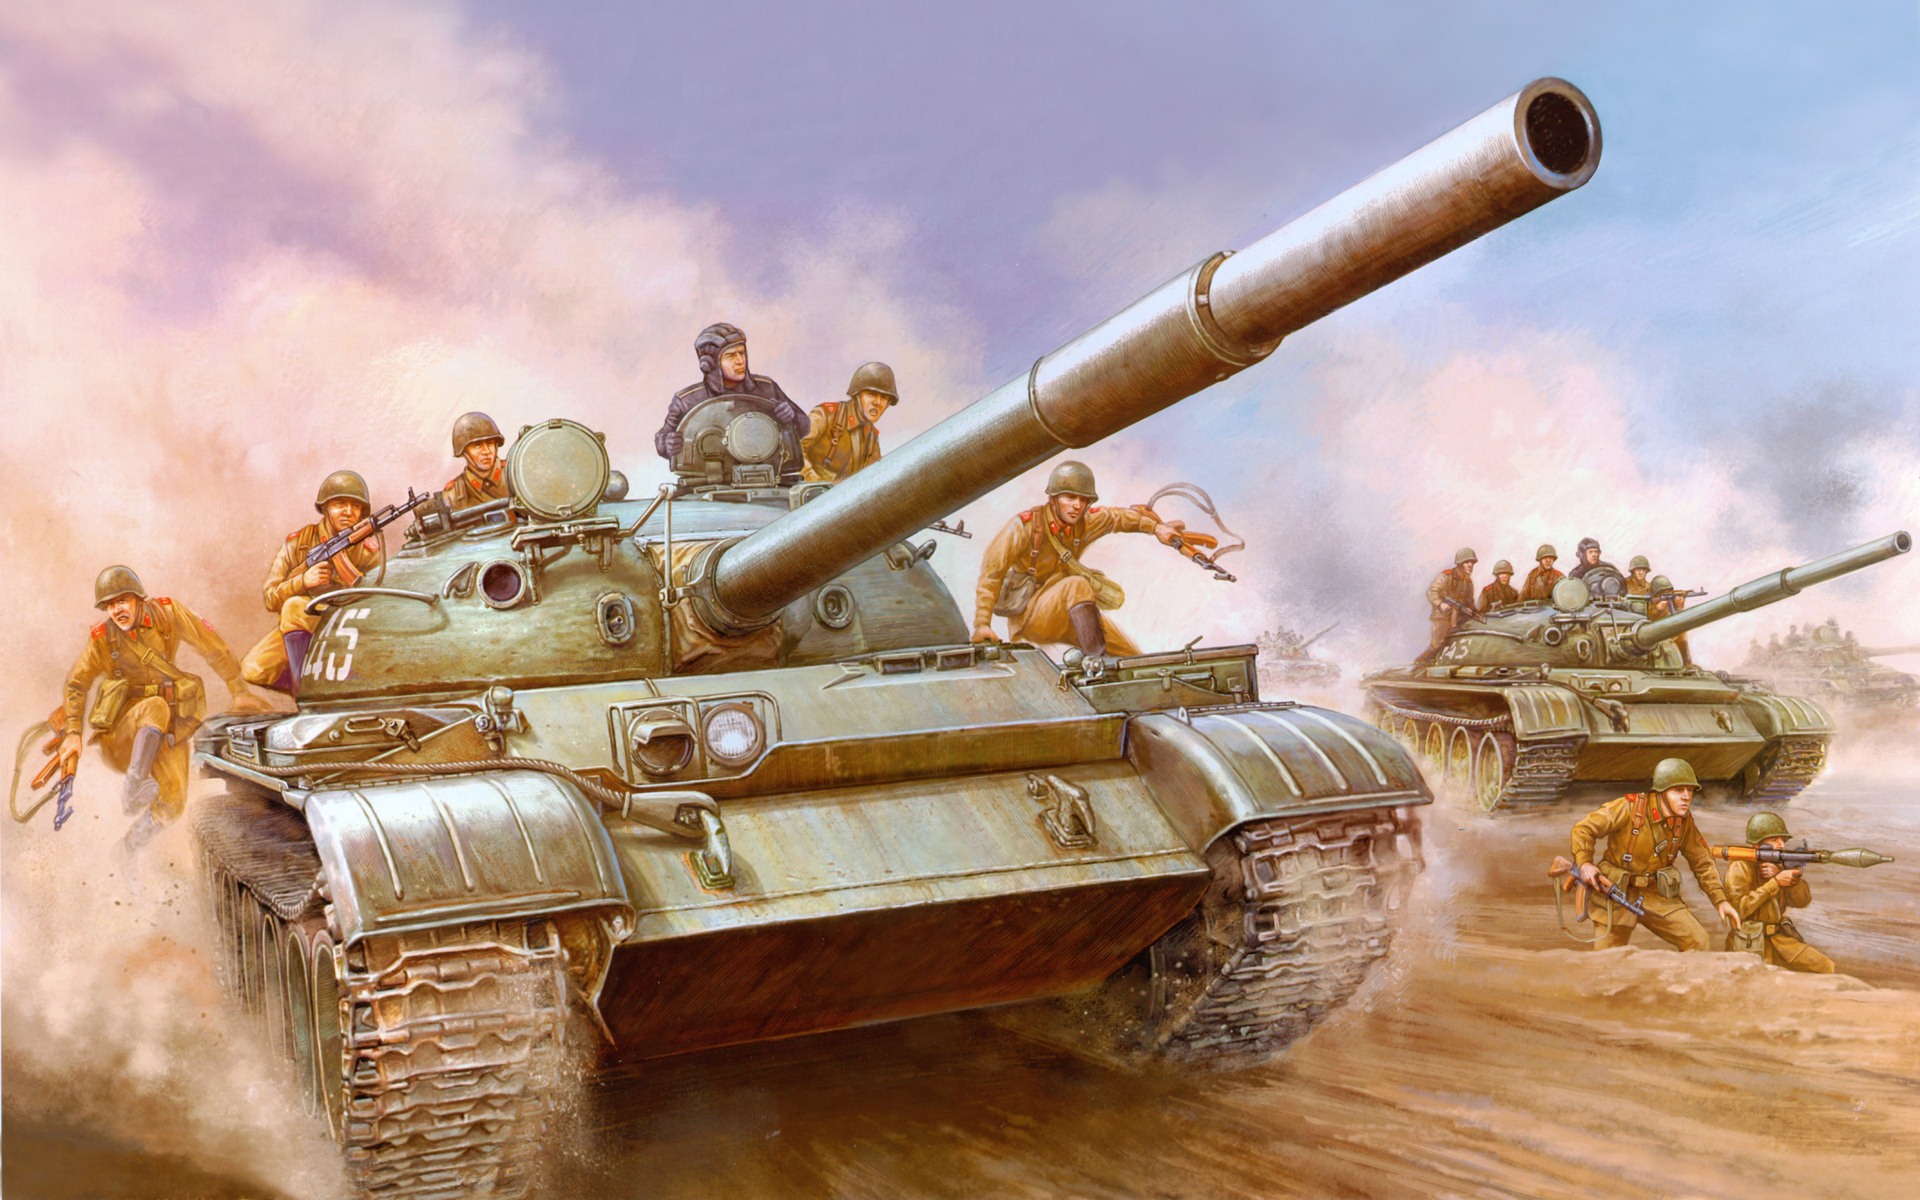 Military tanks, armored HD painting wallpapers #16 - 1920x1200